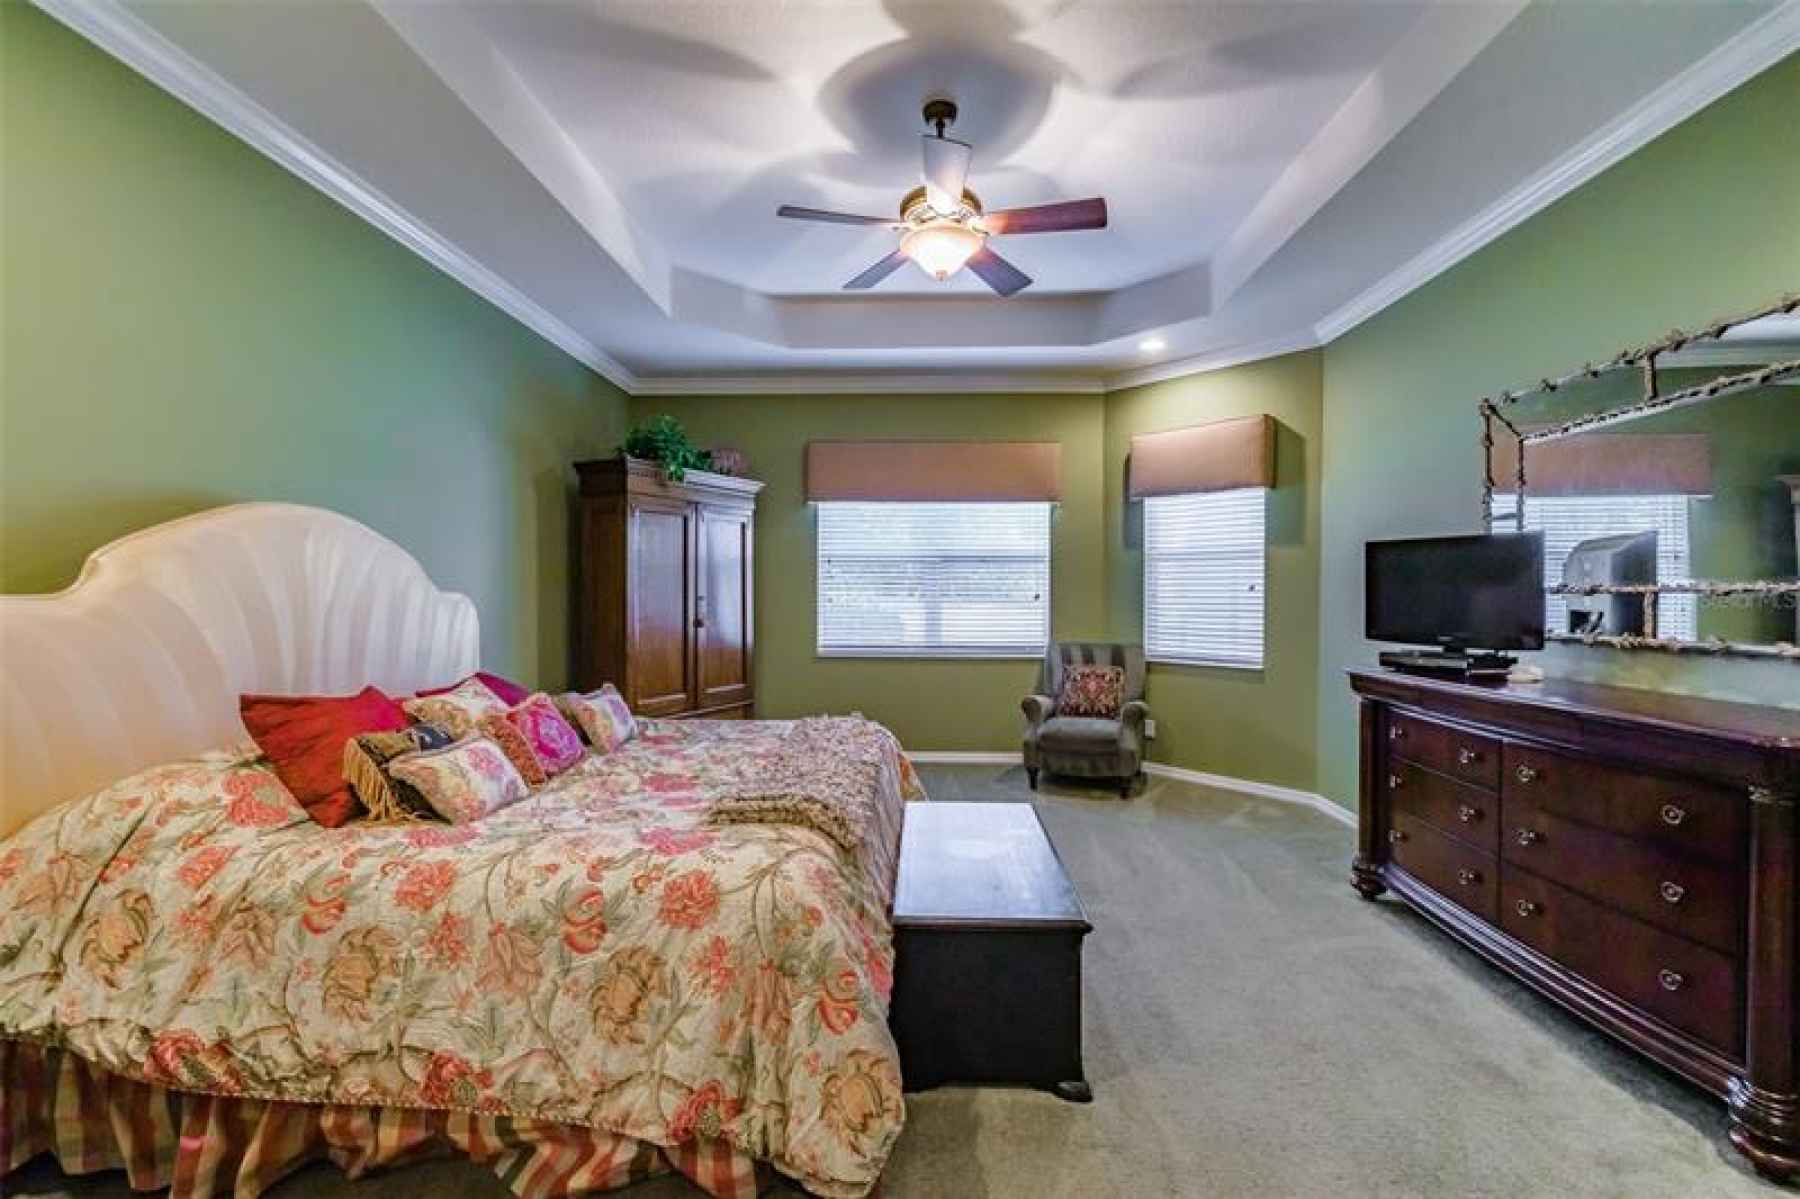 Master Bedroom Suite features a Tray Ceiling, crown molding, bay window, two walk-in closets and a f